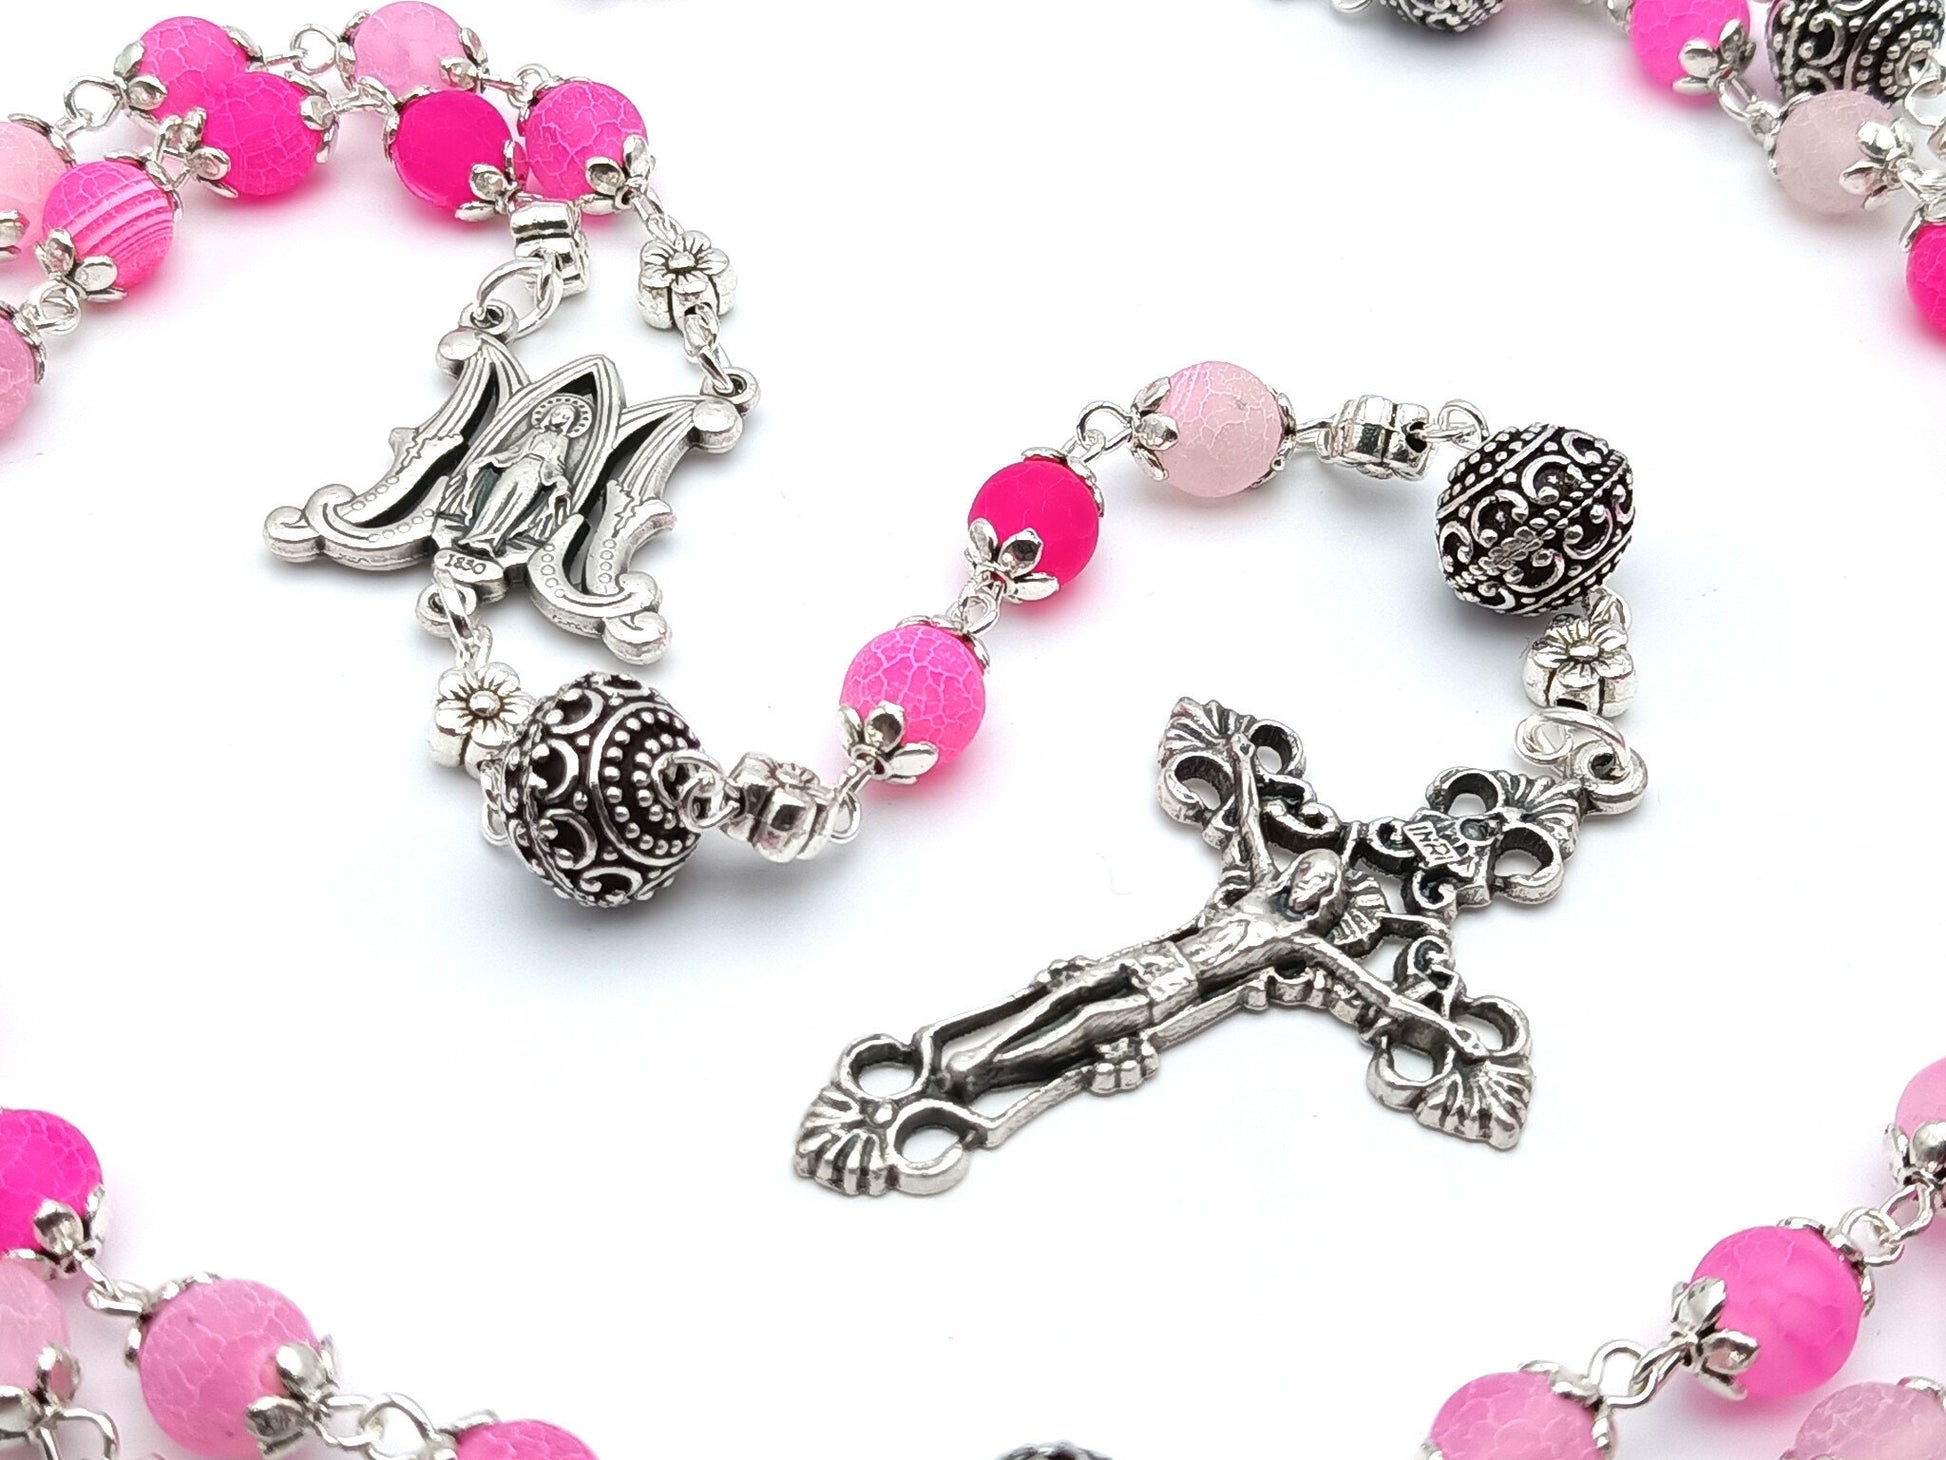 Miraculous medal unique rosary beads with pink agate gemstone beads, silver pater beads, crucifix, centre medal and bead caps.